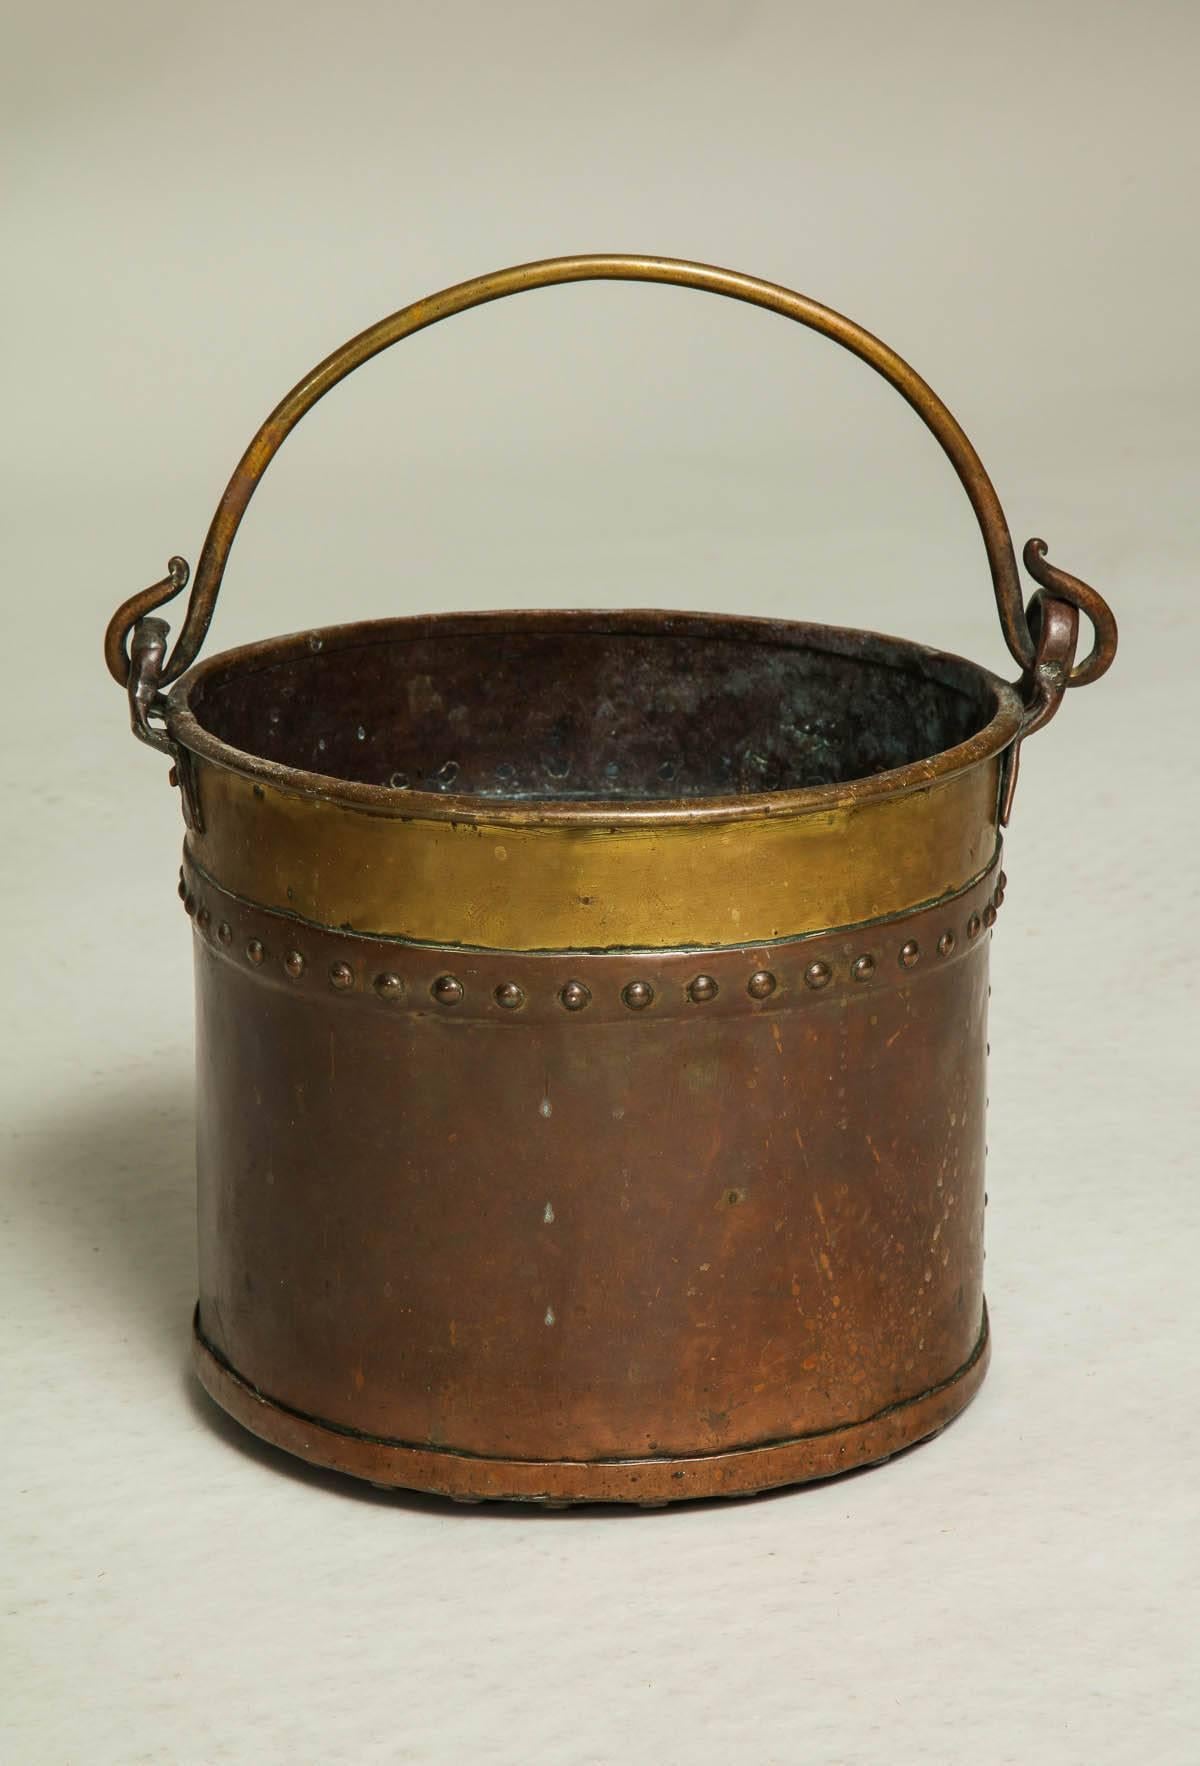 Unusual diminutive copper and brass apple kettle/ bucket having looped brass handle and rim over hammered copper body and having hand riveted seams, indistinctly signed on rim and dated 185-?
Perhaps made for a child or for a special purpose, this